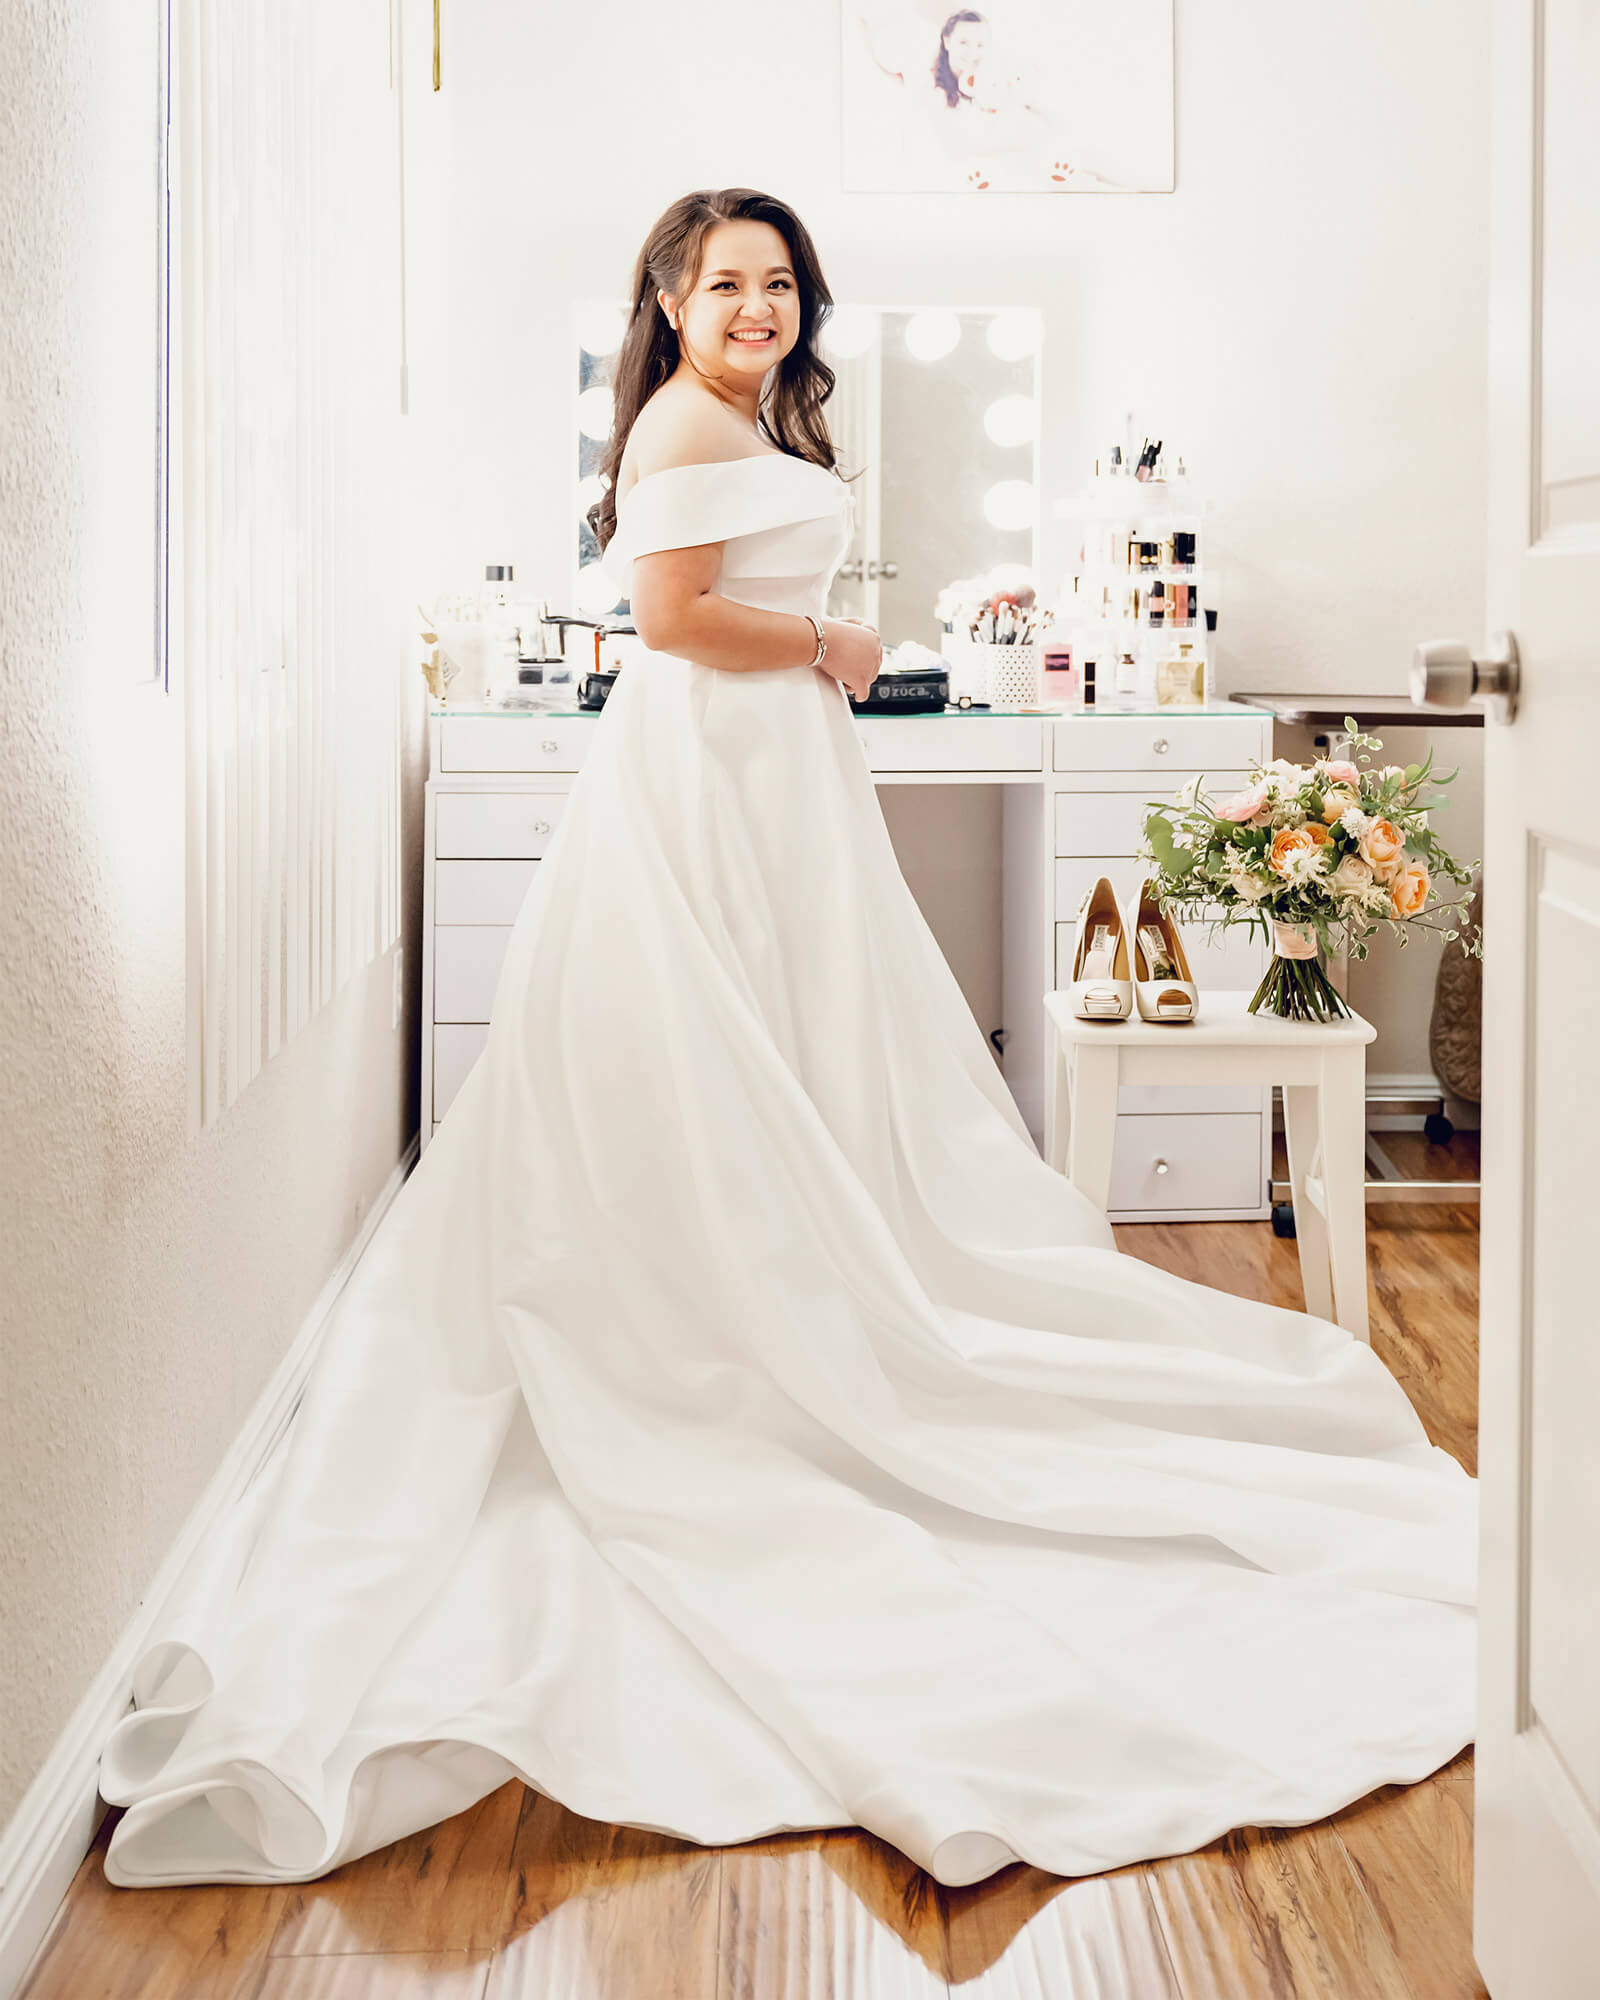 We are in love with Kathlynn's classic & timeless bridal look!